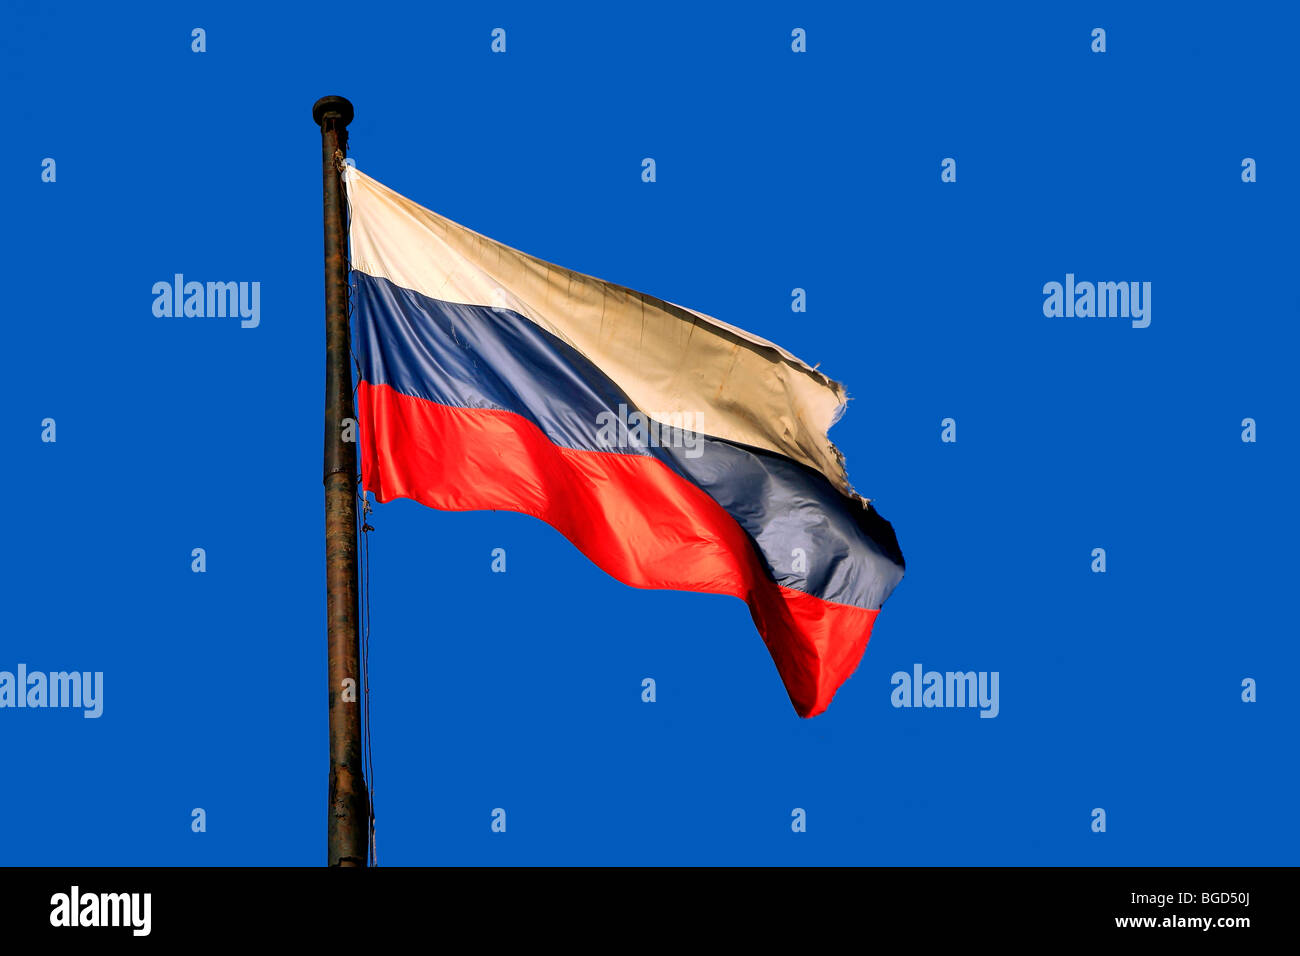 Flag of Russia, Russian Federation, foer, Flagge von Russland, Russische  Foerderation Stock Photo - Alamy